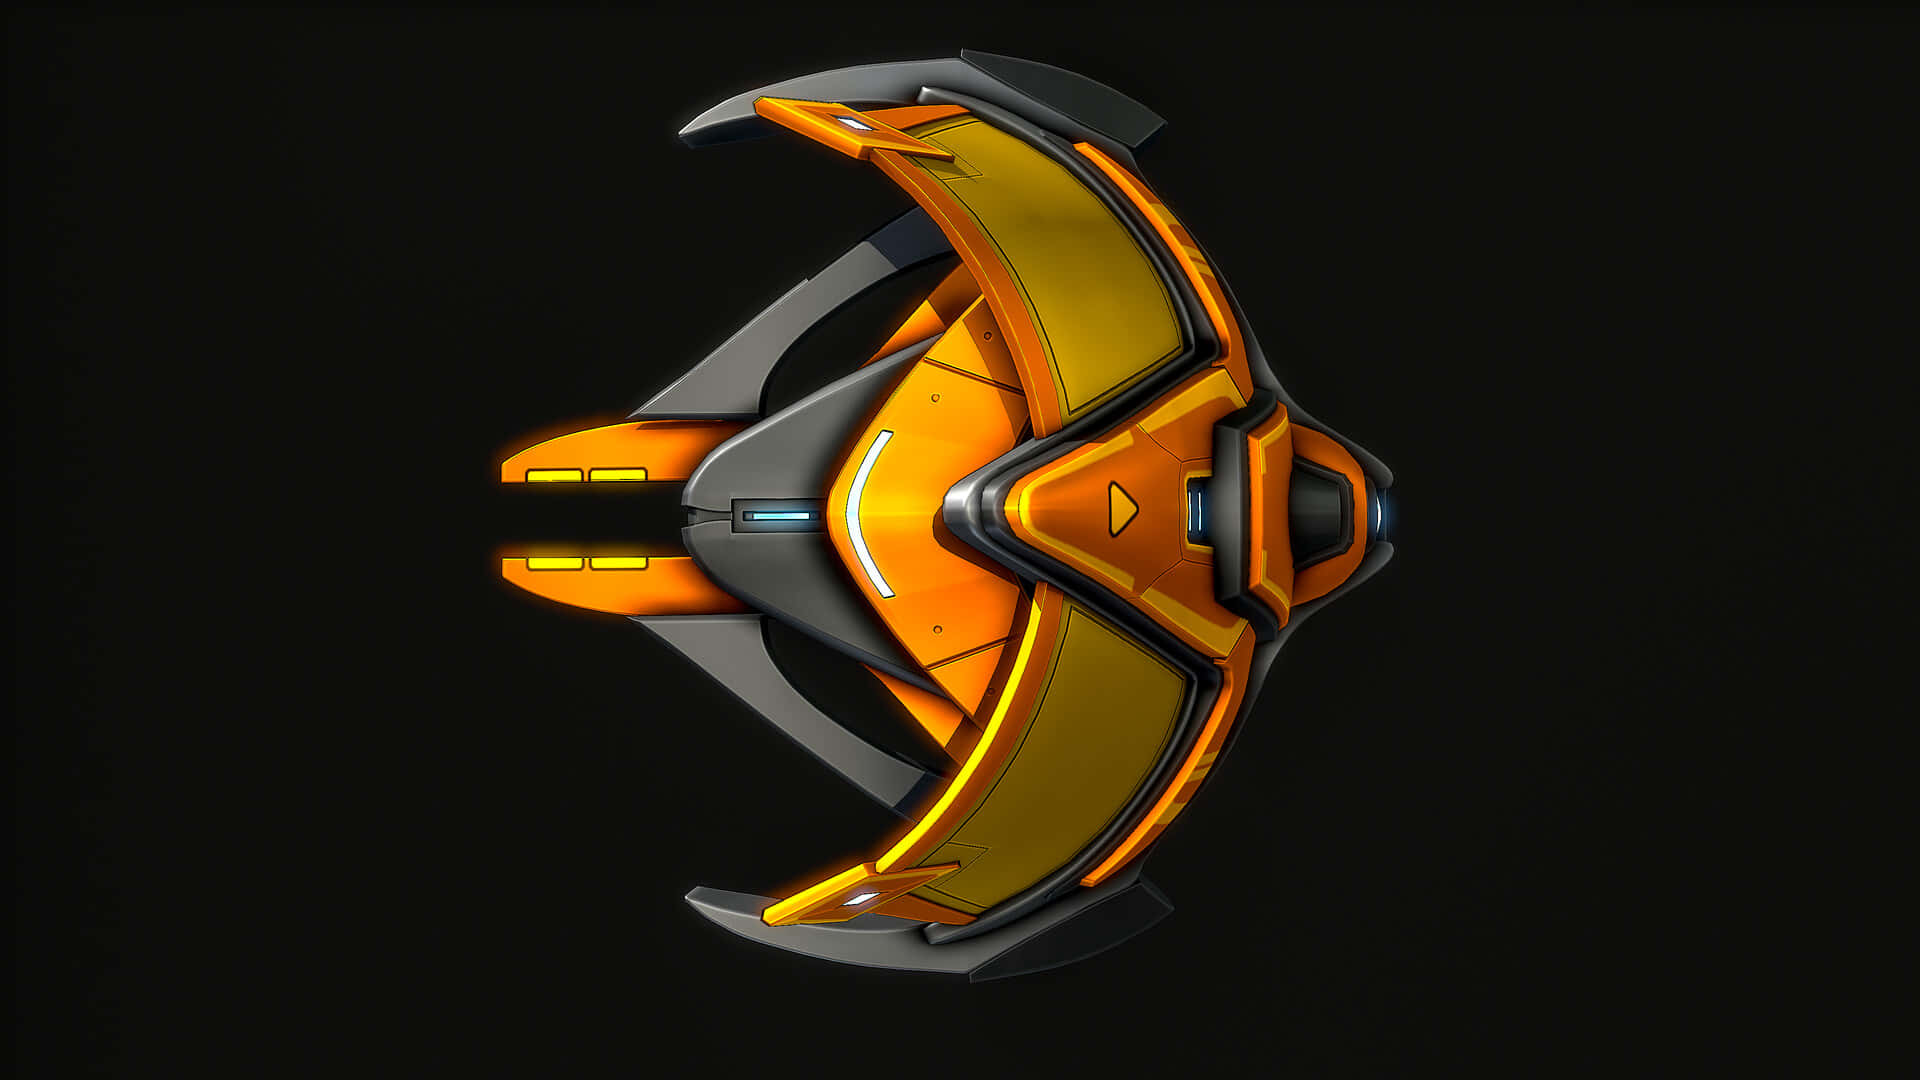 A Futuristic Looking Weapon With A Yellow And Black Design